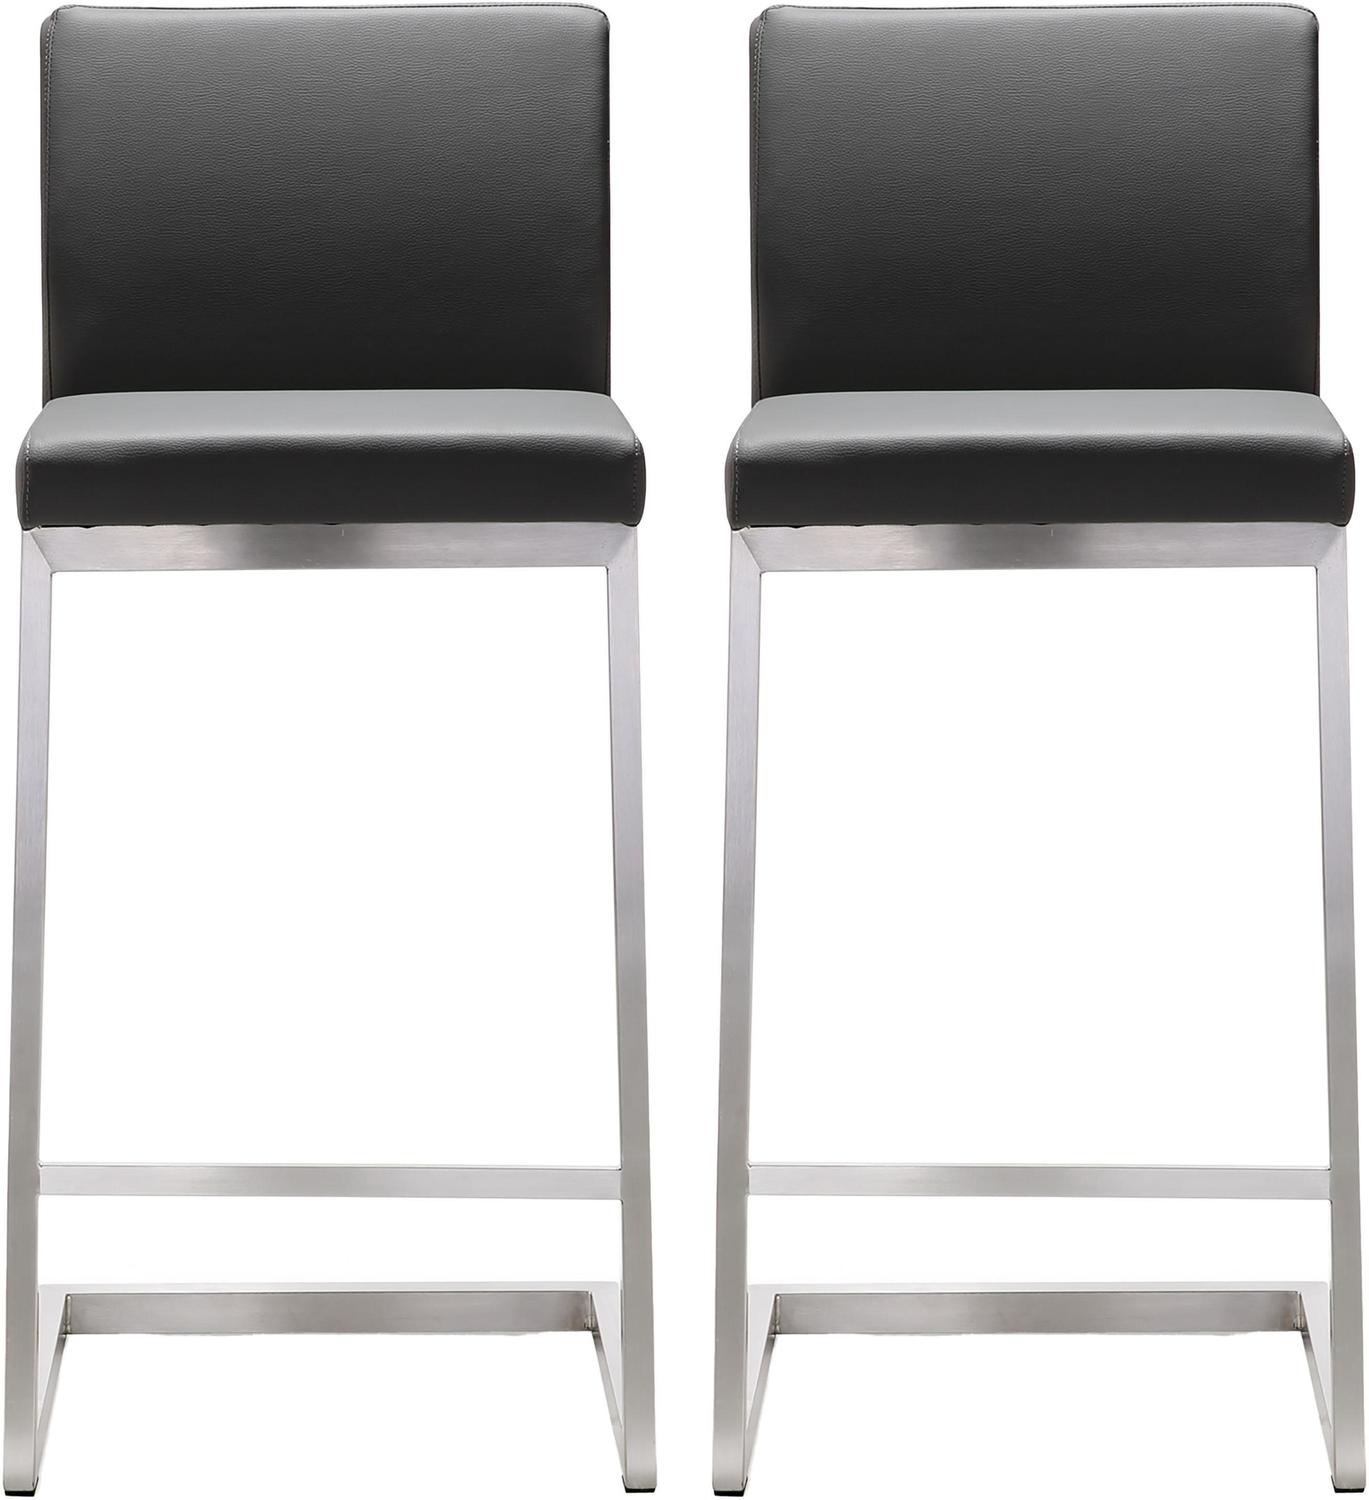 bar and counter stools with backs Contemporary Design Furniture Stools Grey